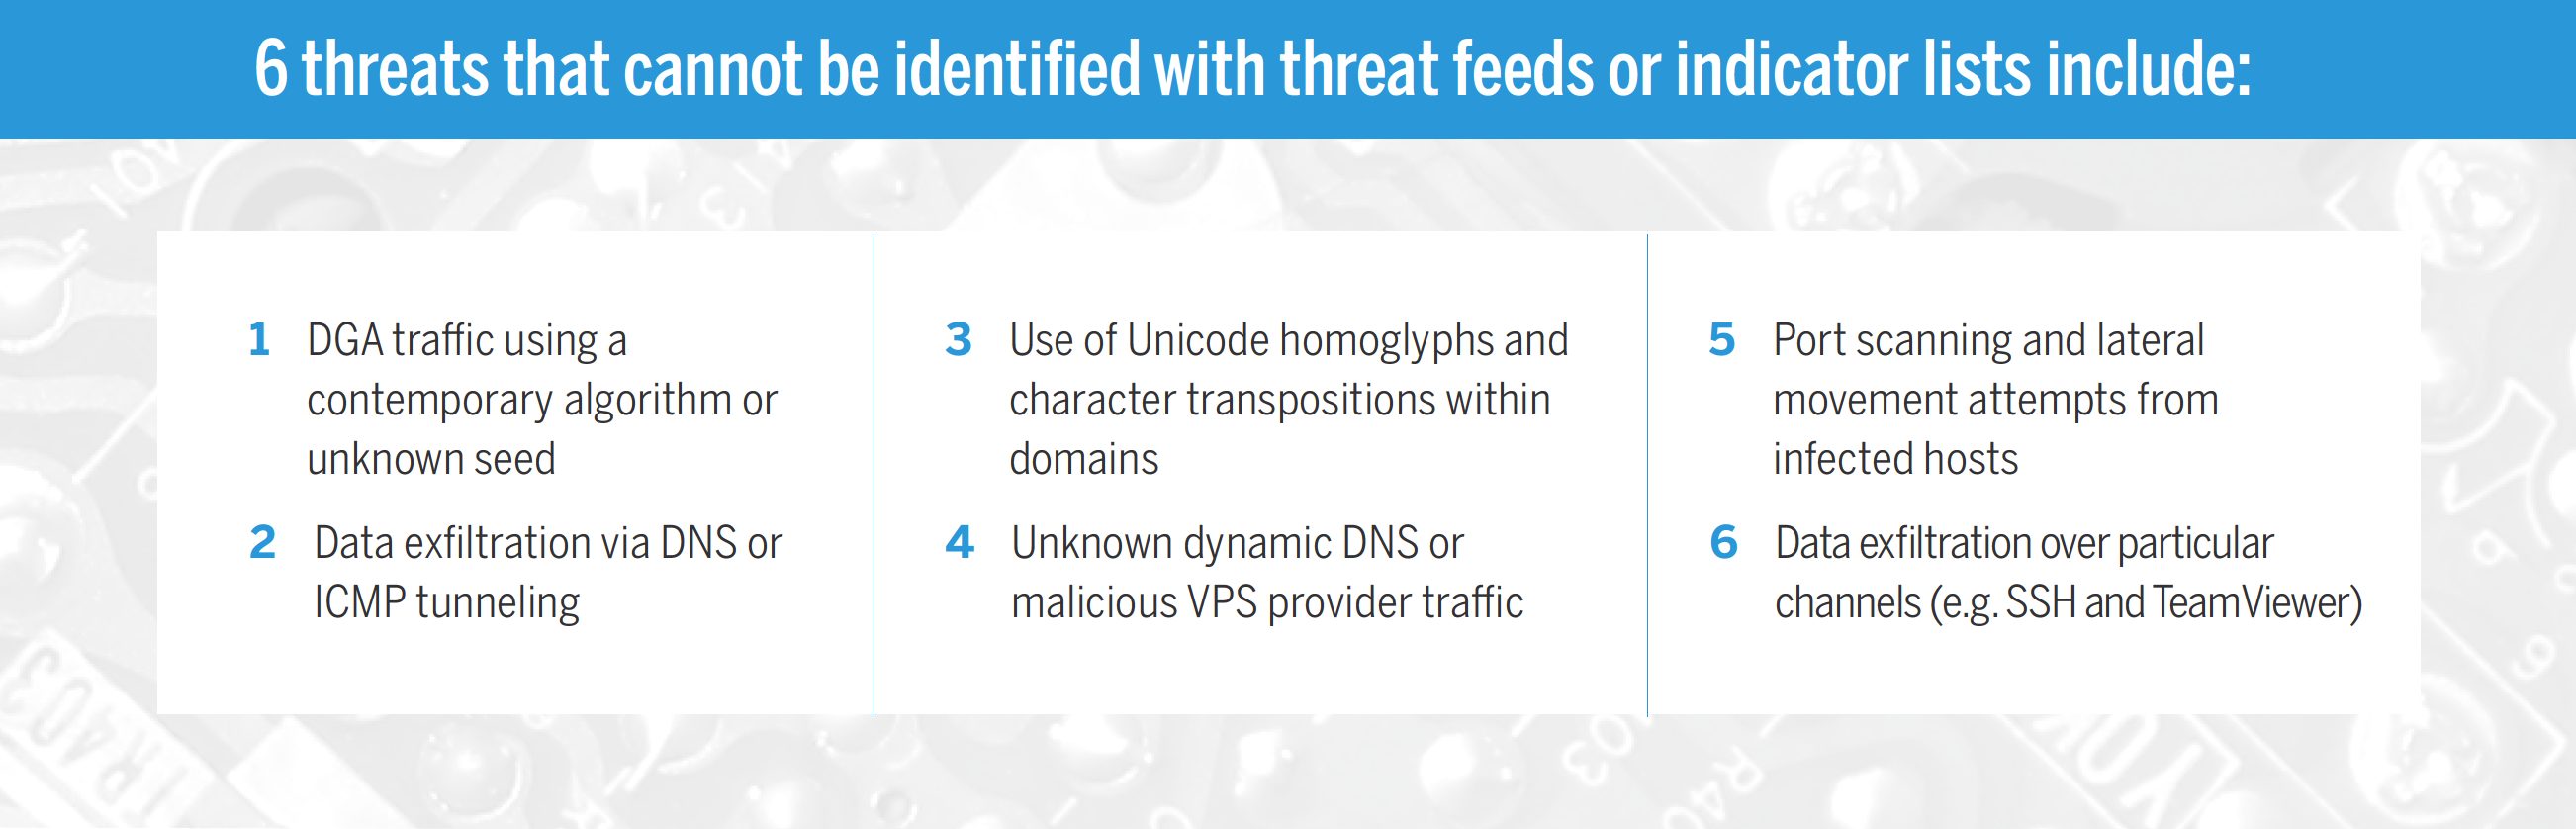 ALphasoc - 6 threats that cannot be identified with threat feeds